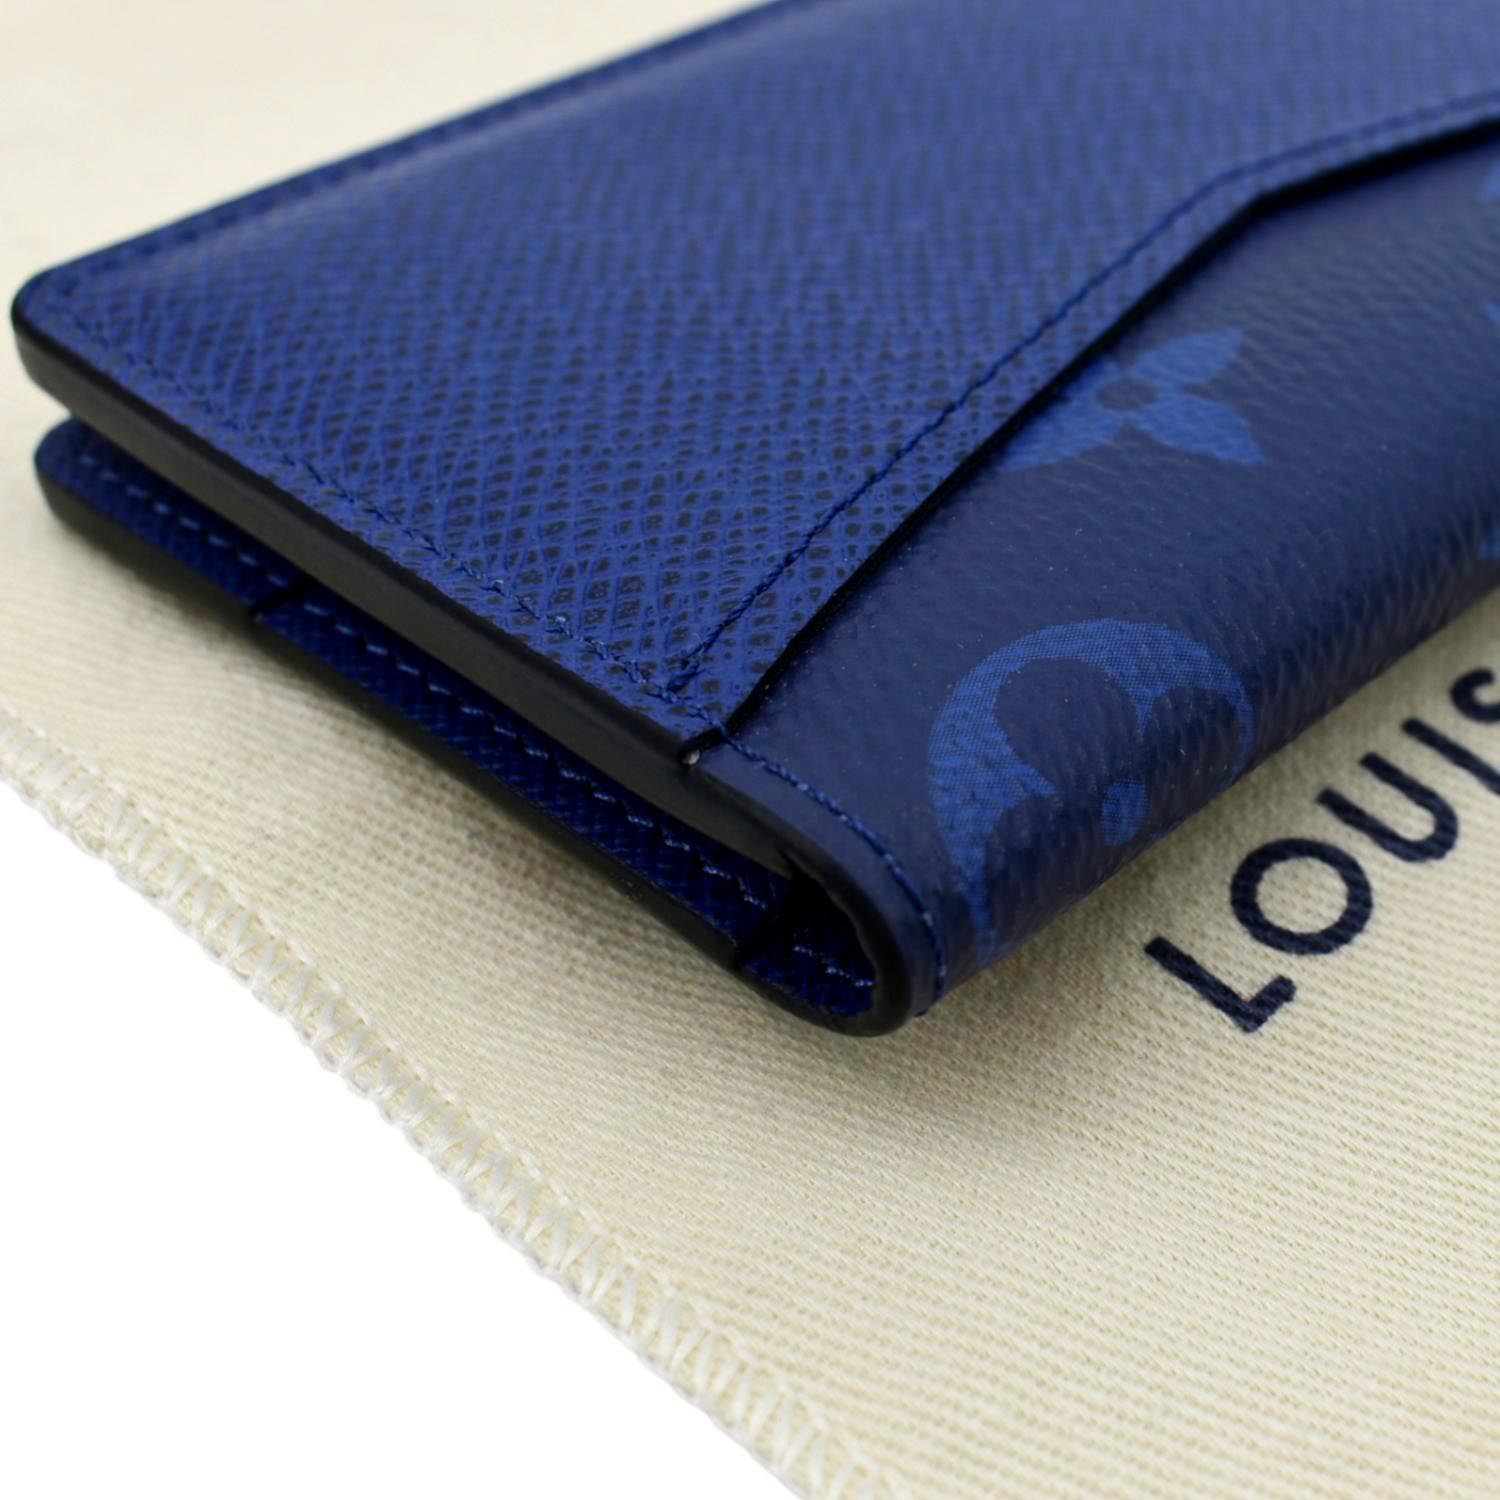 New In Box LOUIS VUITTON Monogram Navy Blue Leather Pen Pencil Cup Holder